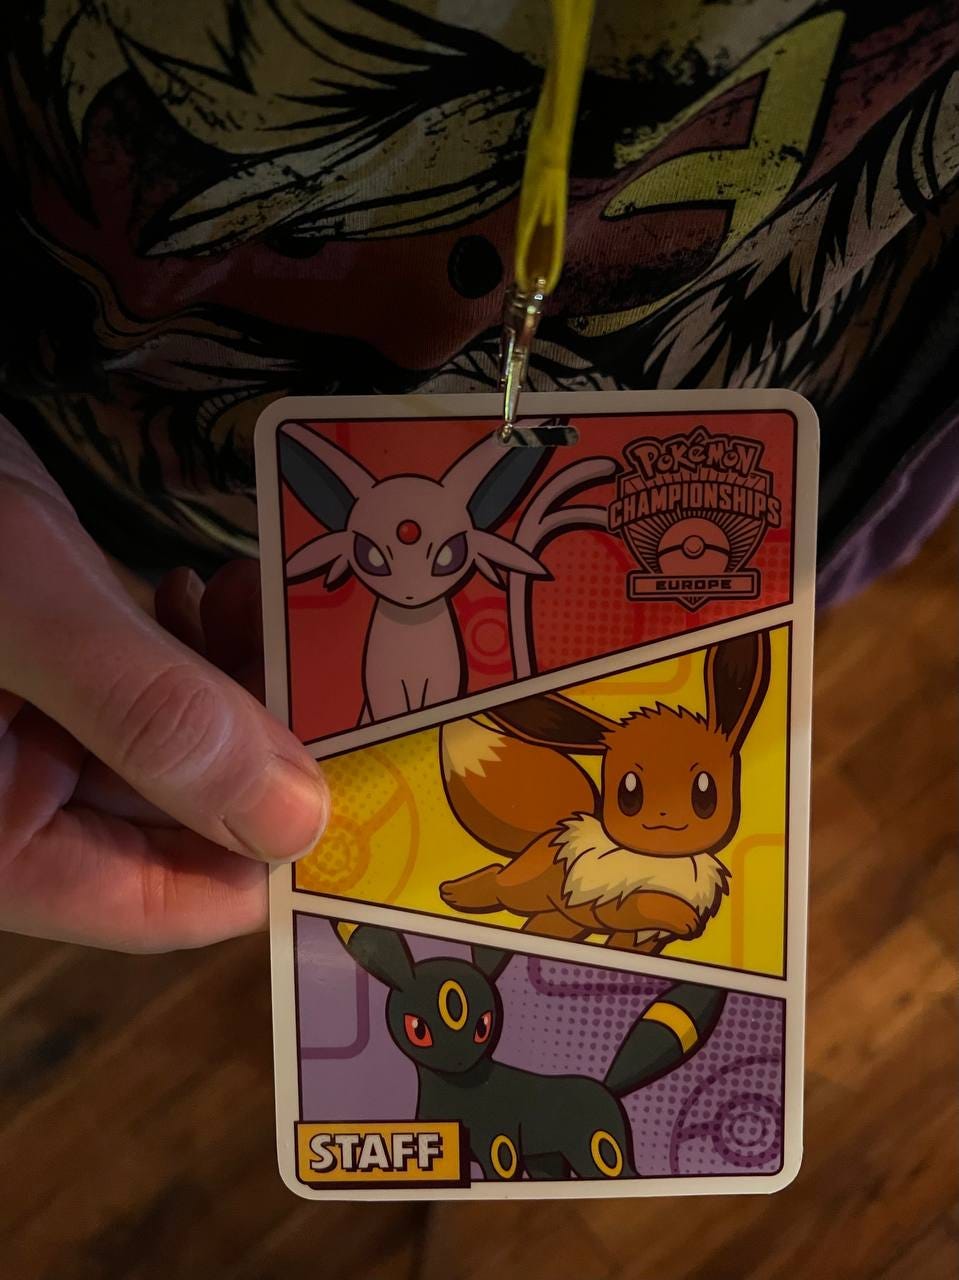 Leon's Lanyard from the event, featuring Espeon, Eevee and Umbreon!